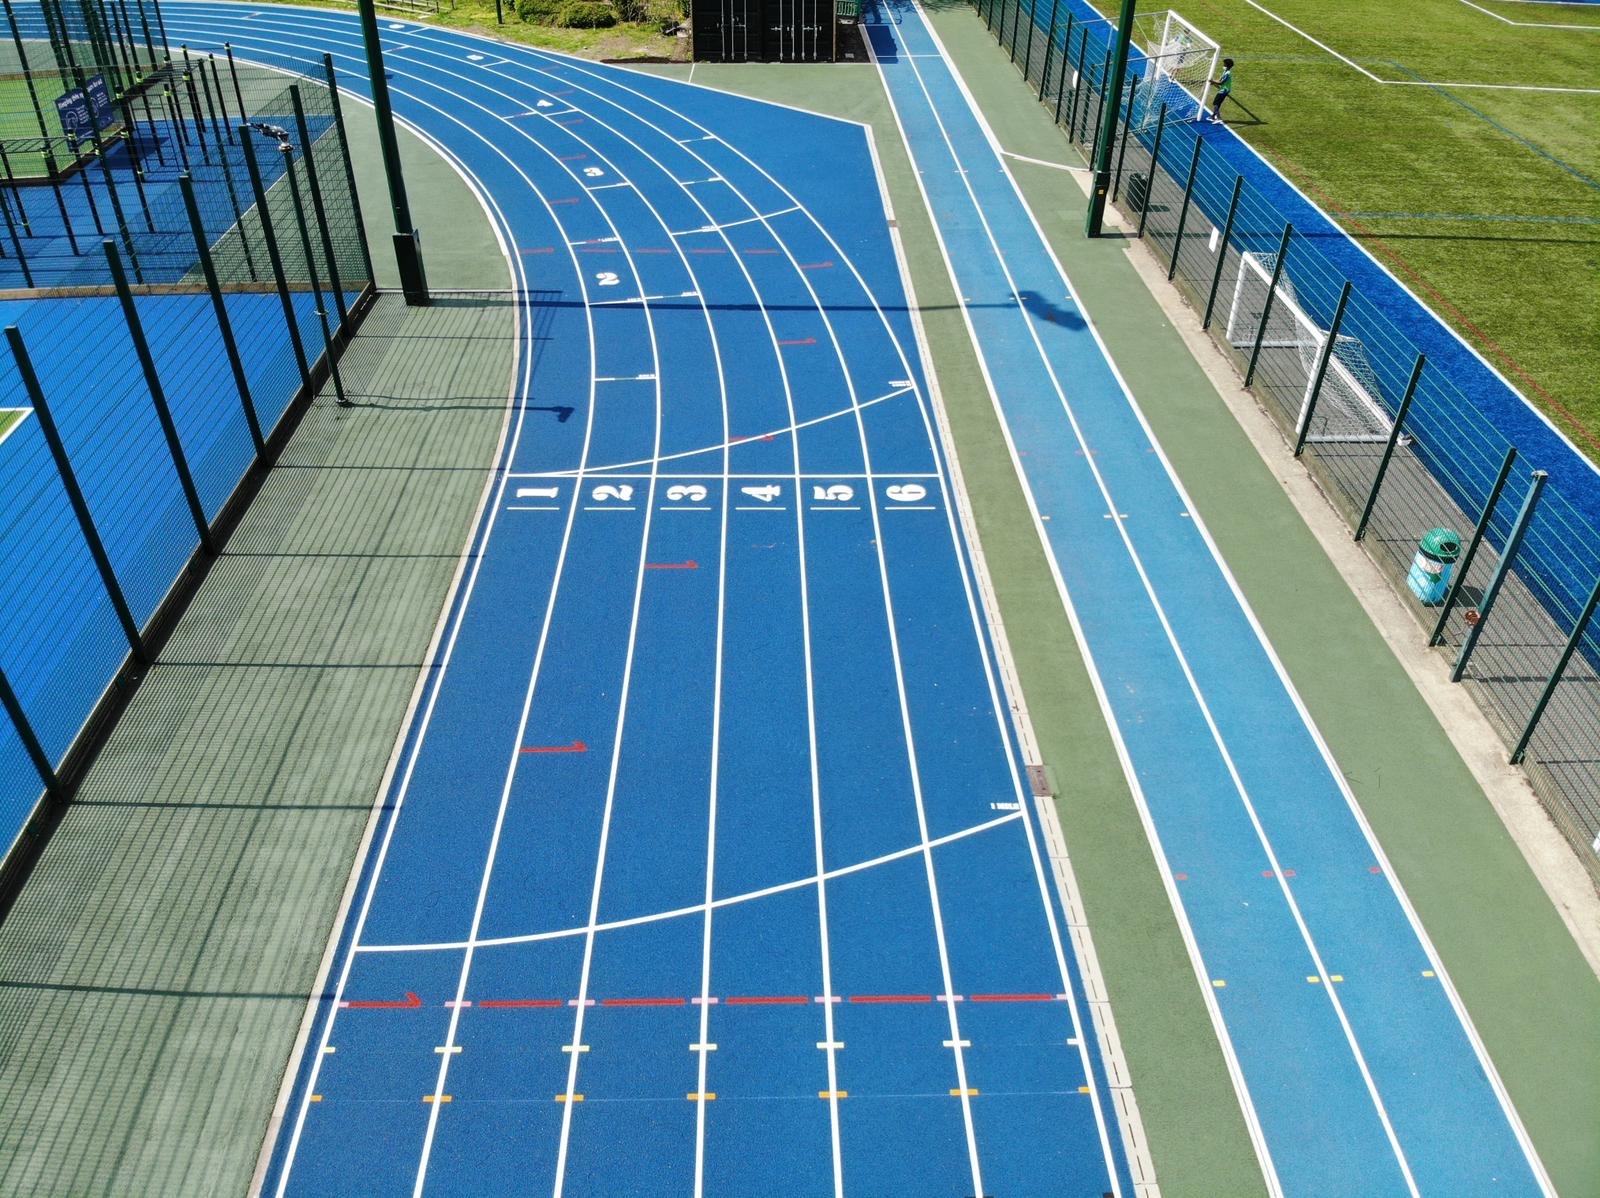 The athletics track surface also features an adjacent sprint straight installed for Westminster City Council in 2022.